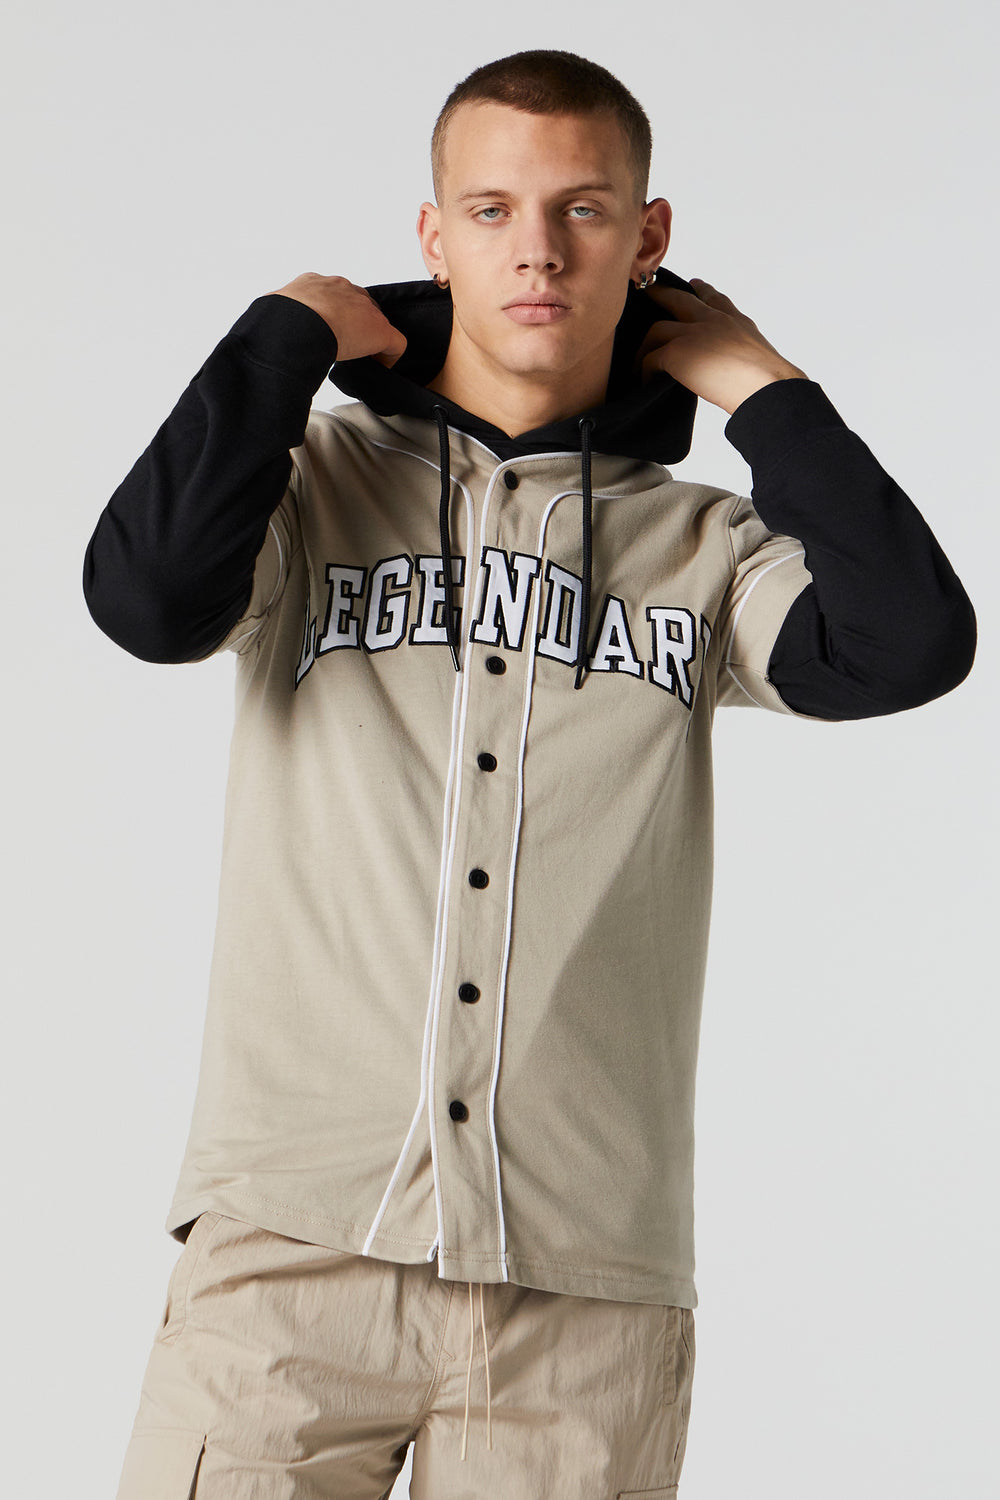 Legendary Graphic Baseball Jersey and Hoodie 2 Piece Set Legendary Graphic Baseball Jersey and Hoodie 2 Piece Set 1